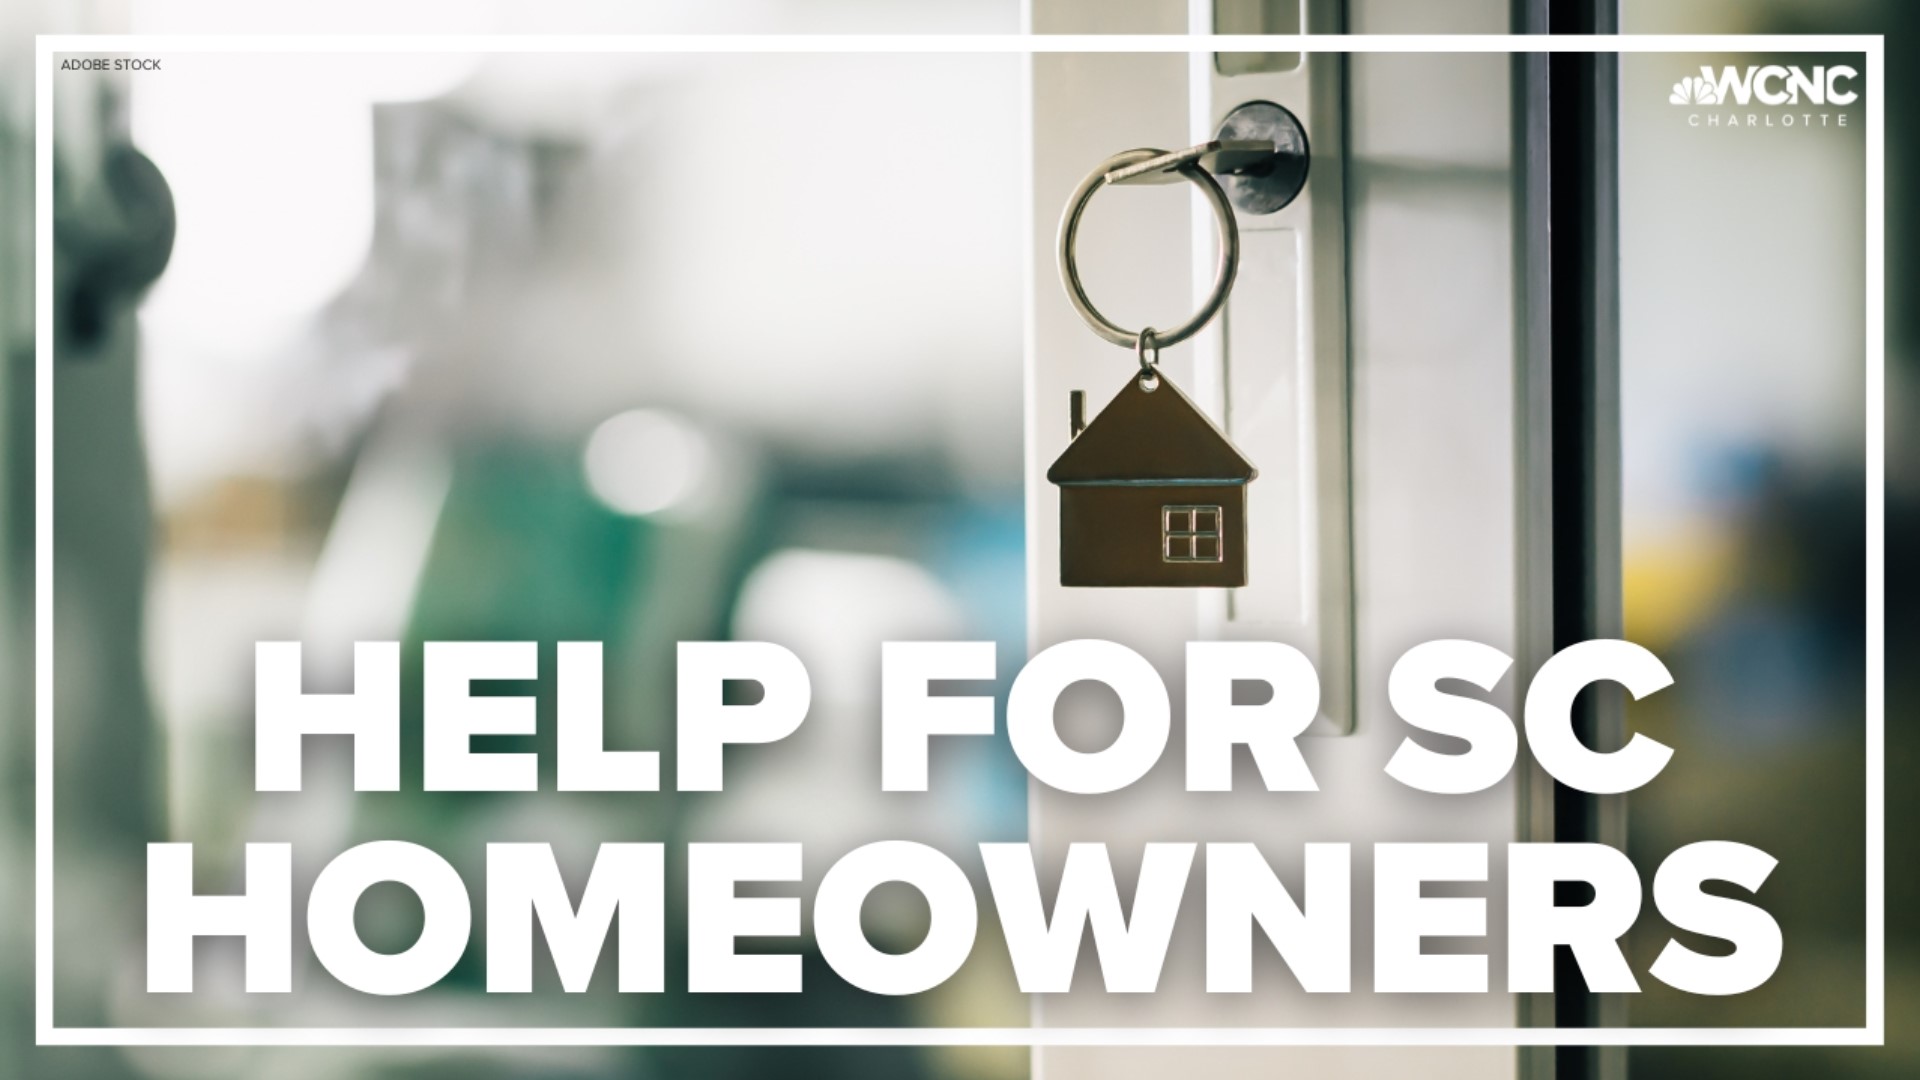 South Carolina Housing is looking to help homeowners keep their homes. The state has more than $100 million in COVID rescue plan funds available.